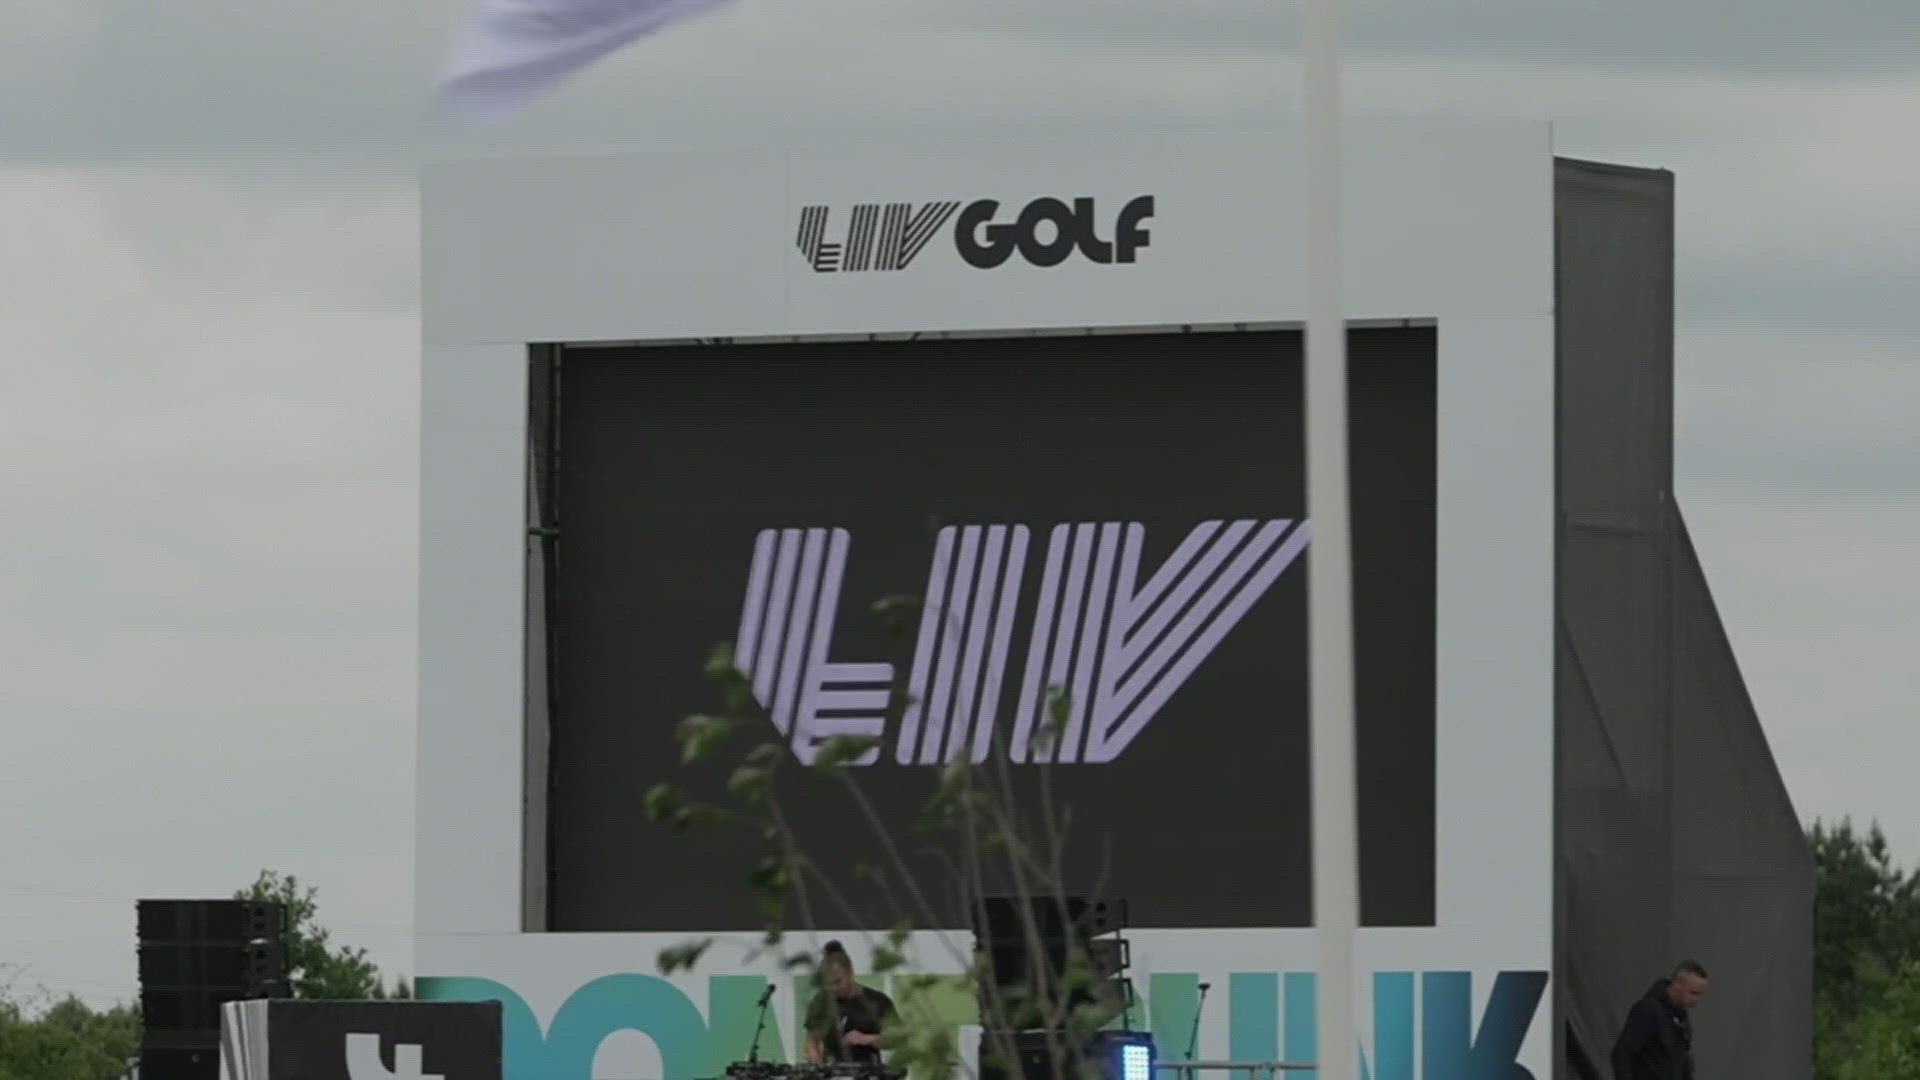 The department of justice is now set to investigate the planned partnership between the PGA tour, and Saudi-owned LIV golf.